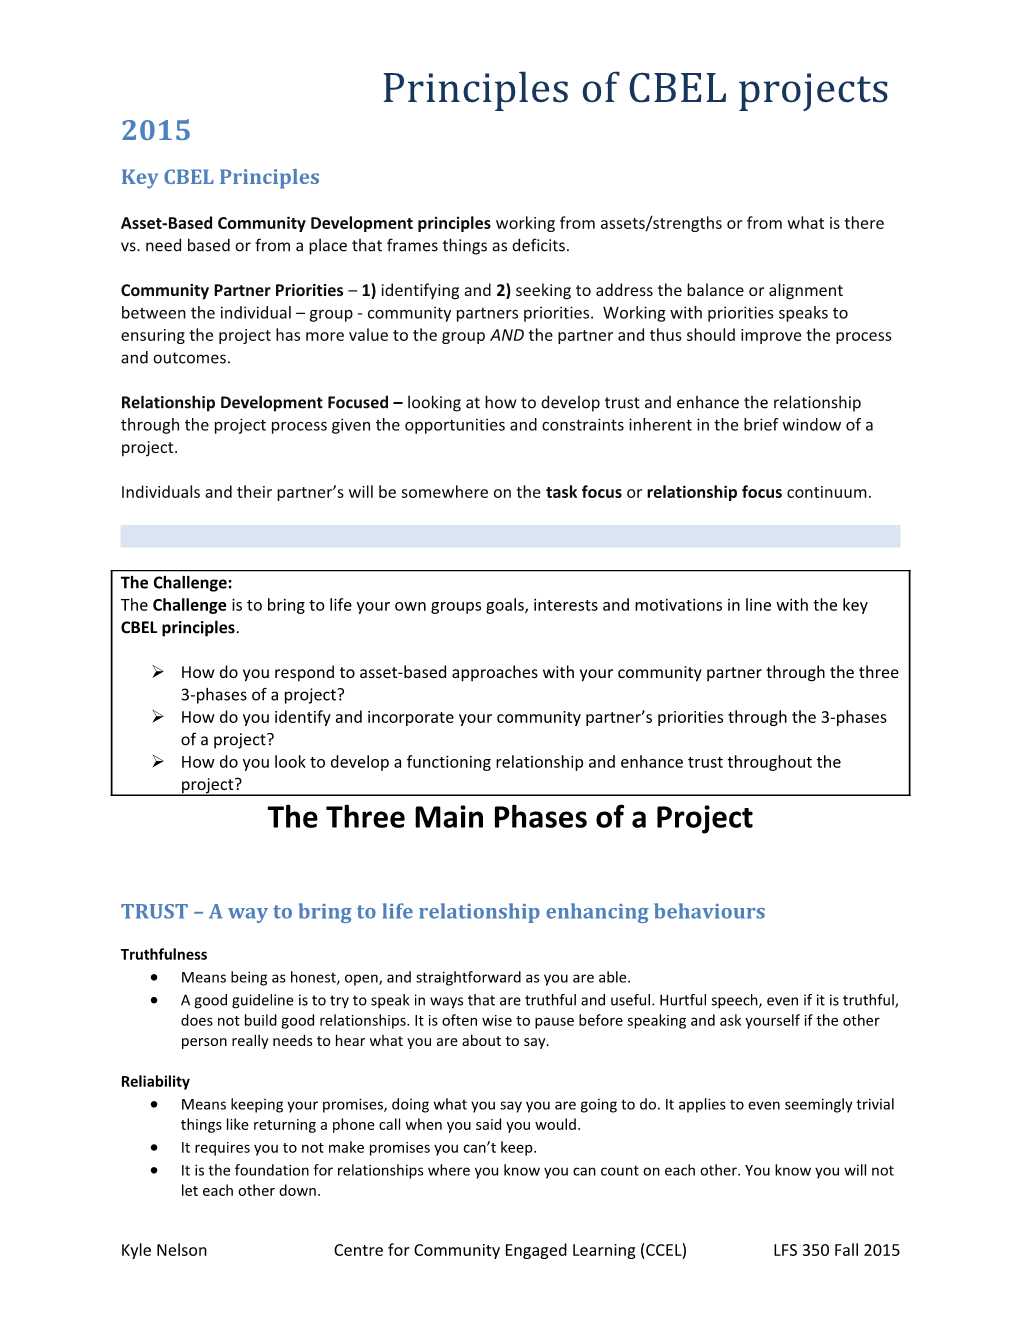 Principles of CBEL Projects